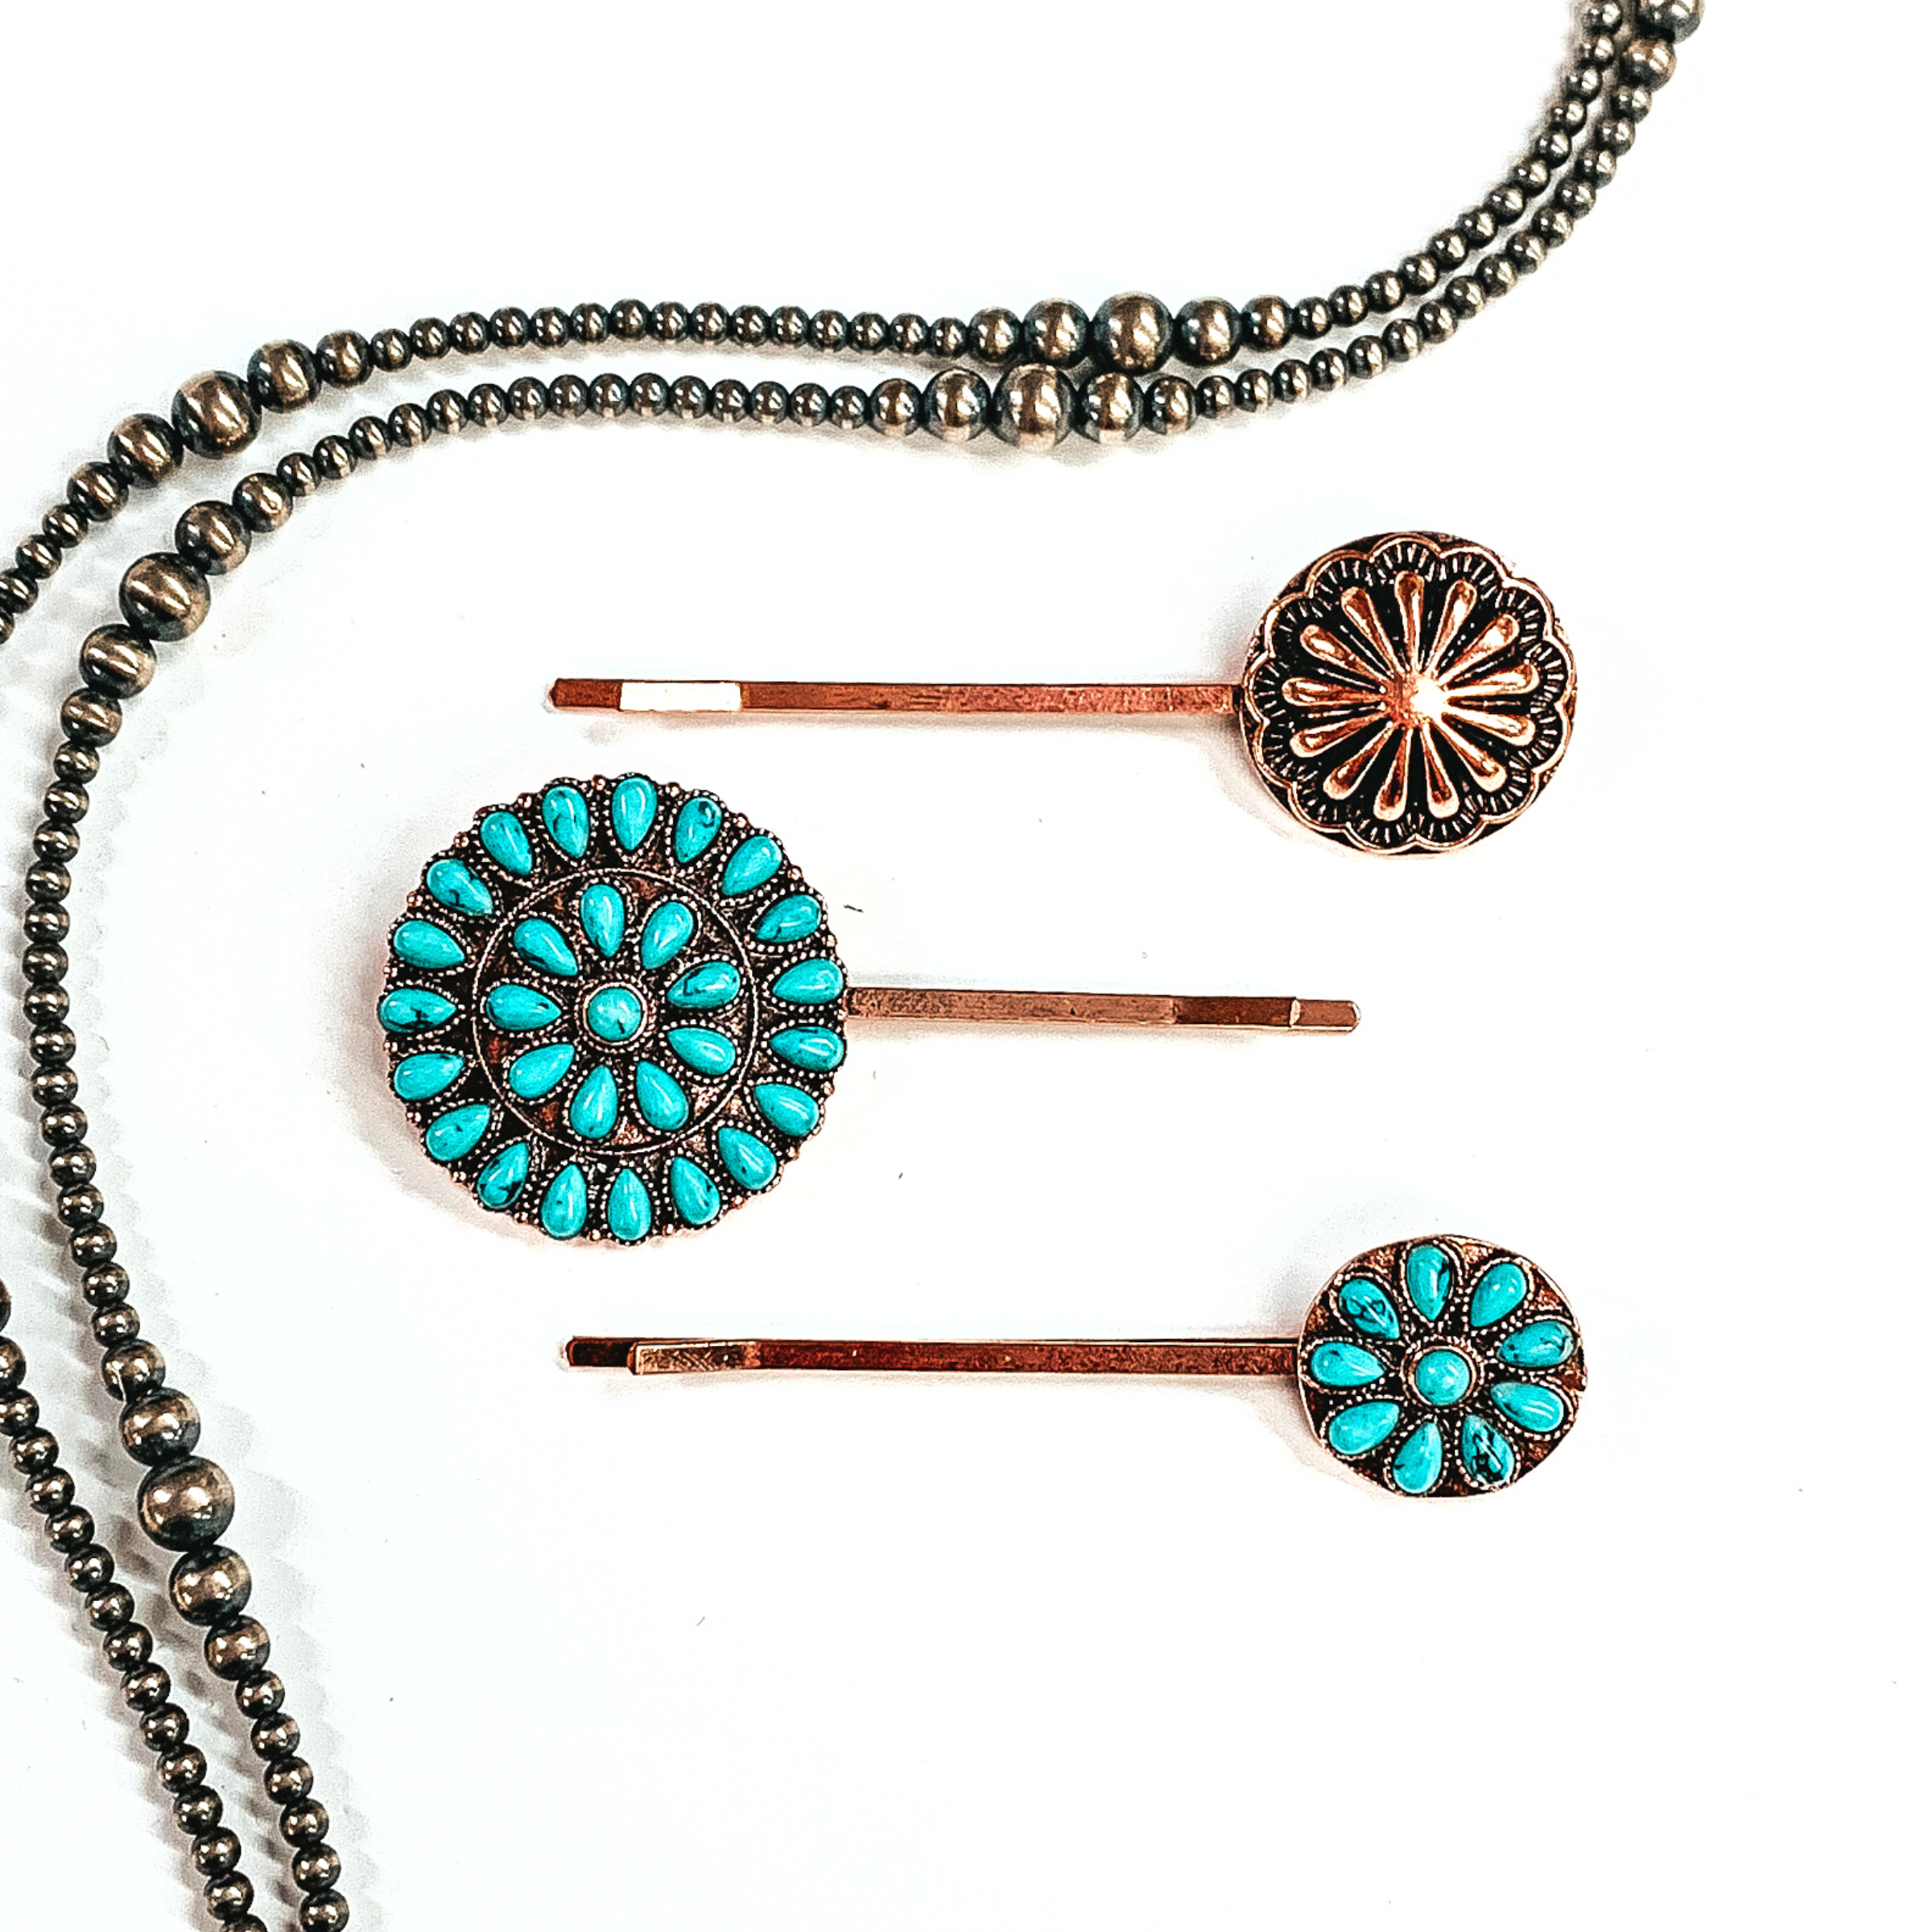 There are three copper bobby pins with conchos and faux turquoise clusters. From  top to bottom; copper concho, large circle stone cluster, small circle stone cluster. These bobby pins are taken on a white background  with silver navajo pearls around as decor.